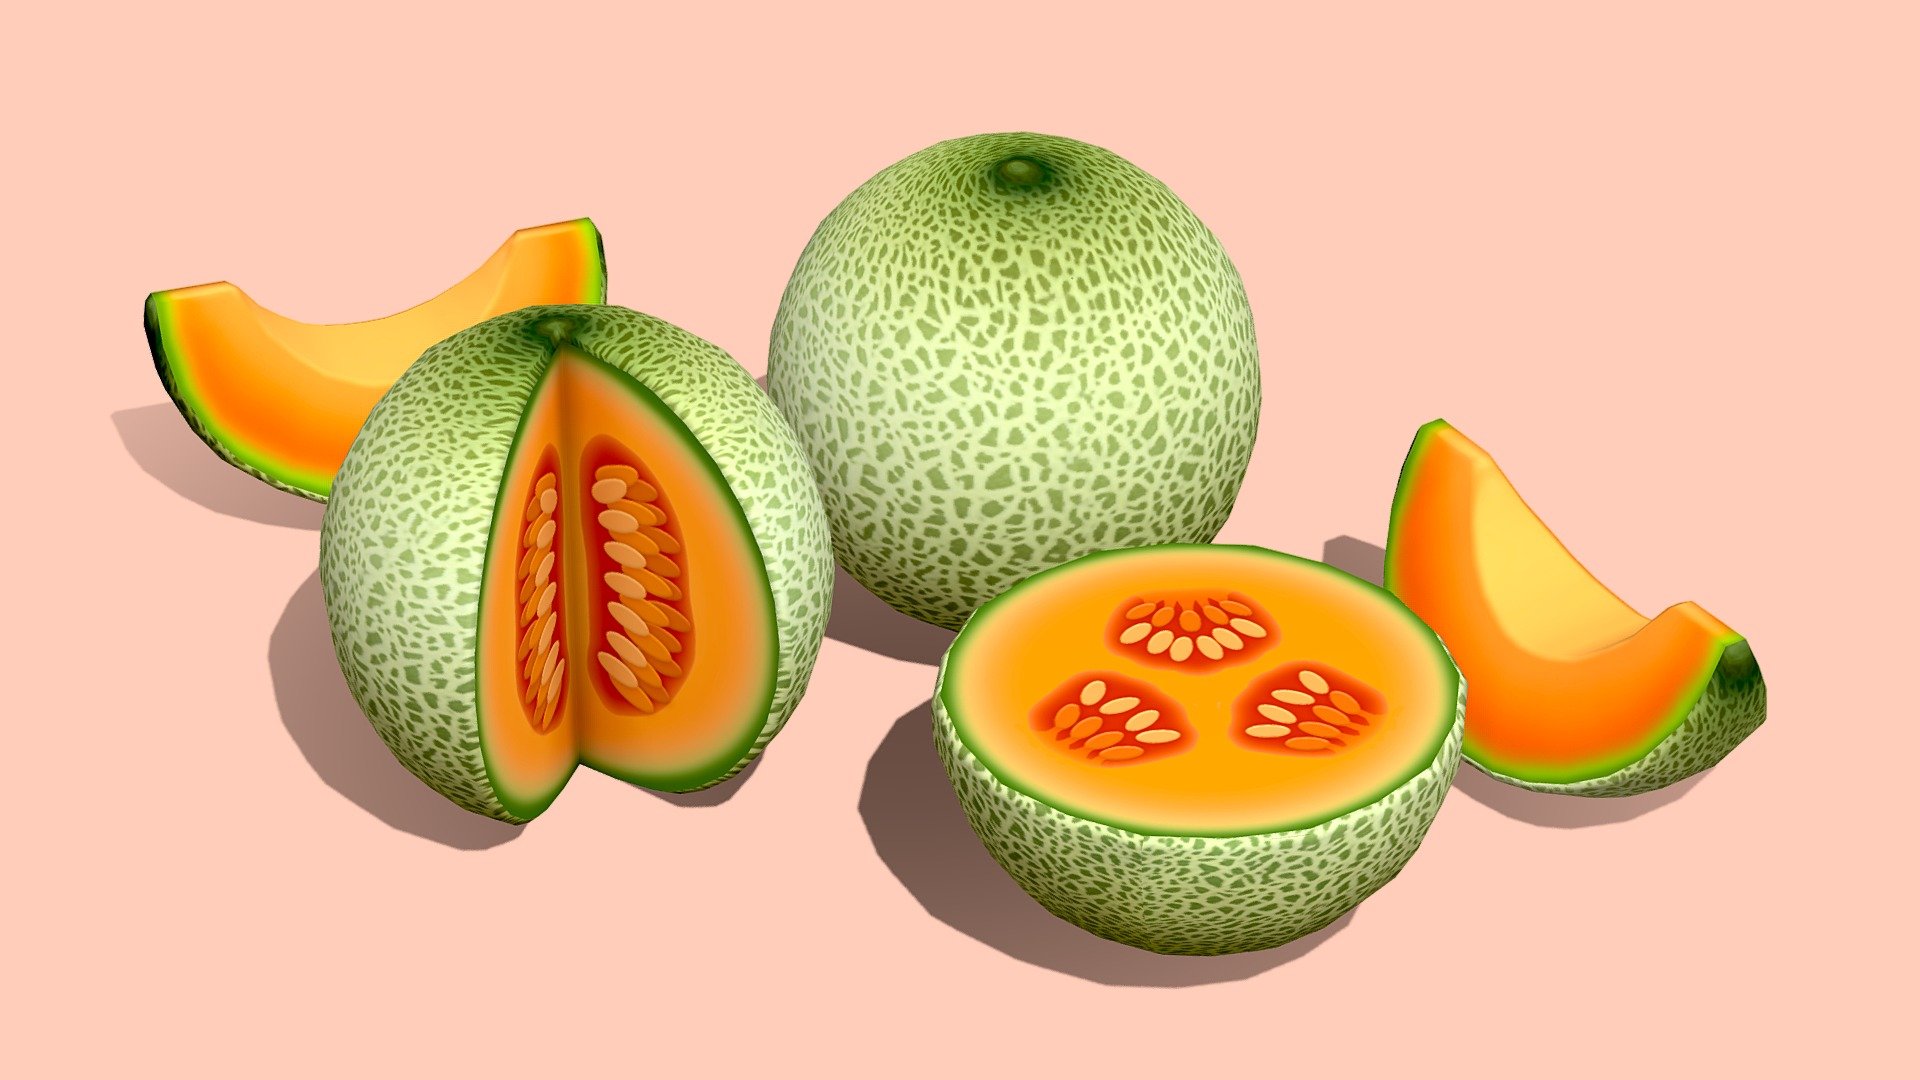 A sweet and colorful treat 




Includes: whole melon, half version, cut version and slice 

1024x1024 diffuse textures - can be lit or unlit

Low-poly models and handpainted textures
 - Cartoon Cantaloupe Melons - Buy Royalty Free 3D model by Megan Alcock (@citystreetlight) 3d model